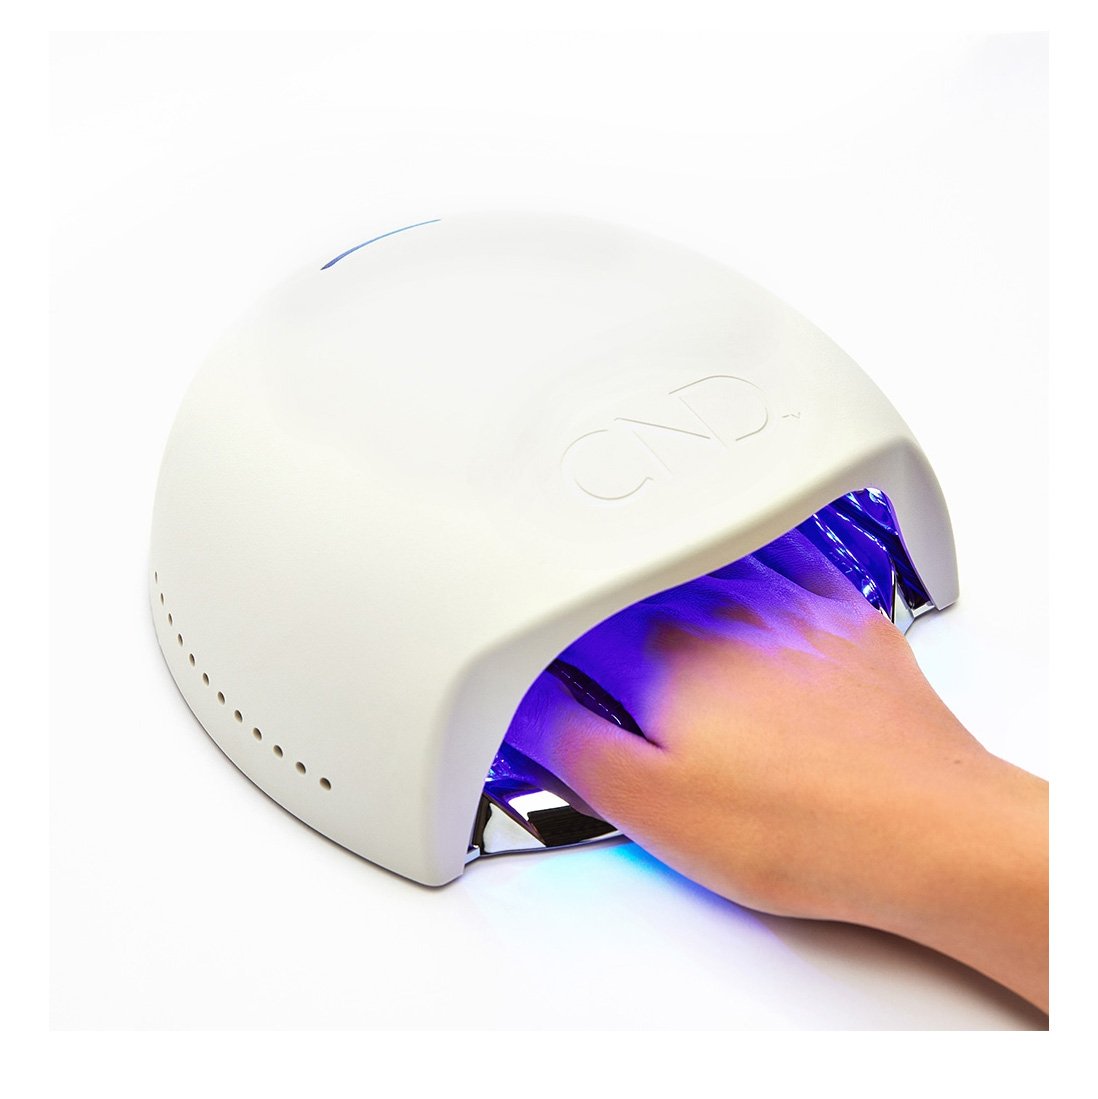 CND LED LAMP - A Patented Curing Technology (Version 2)